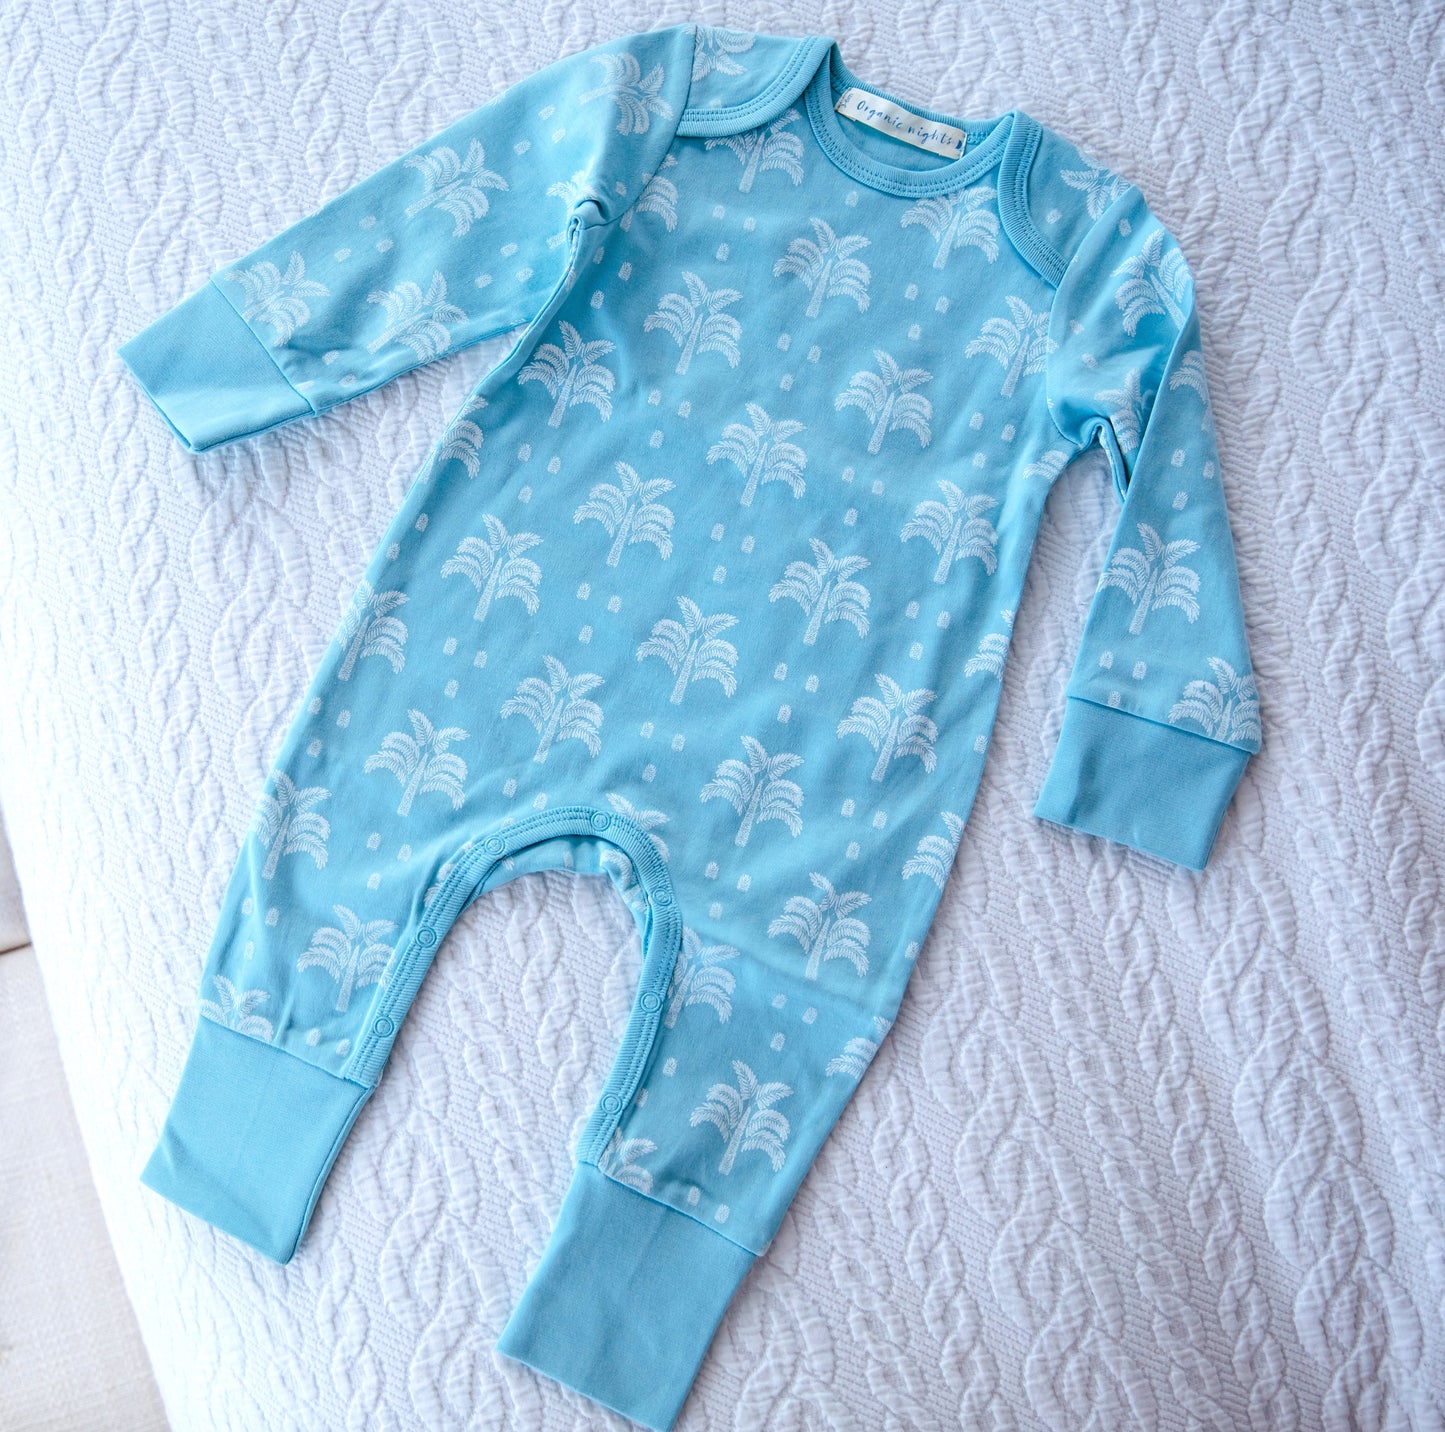 Organic Cotton Baby Onesie Sleepsuit in Aquatic Blue Palms and Pineapples